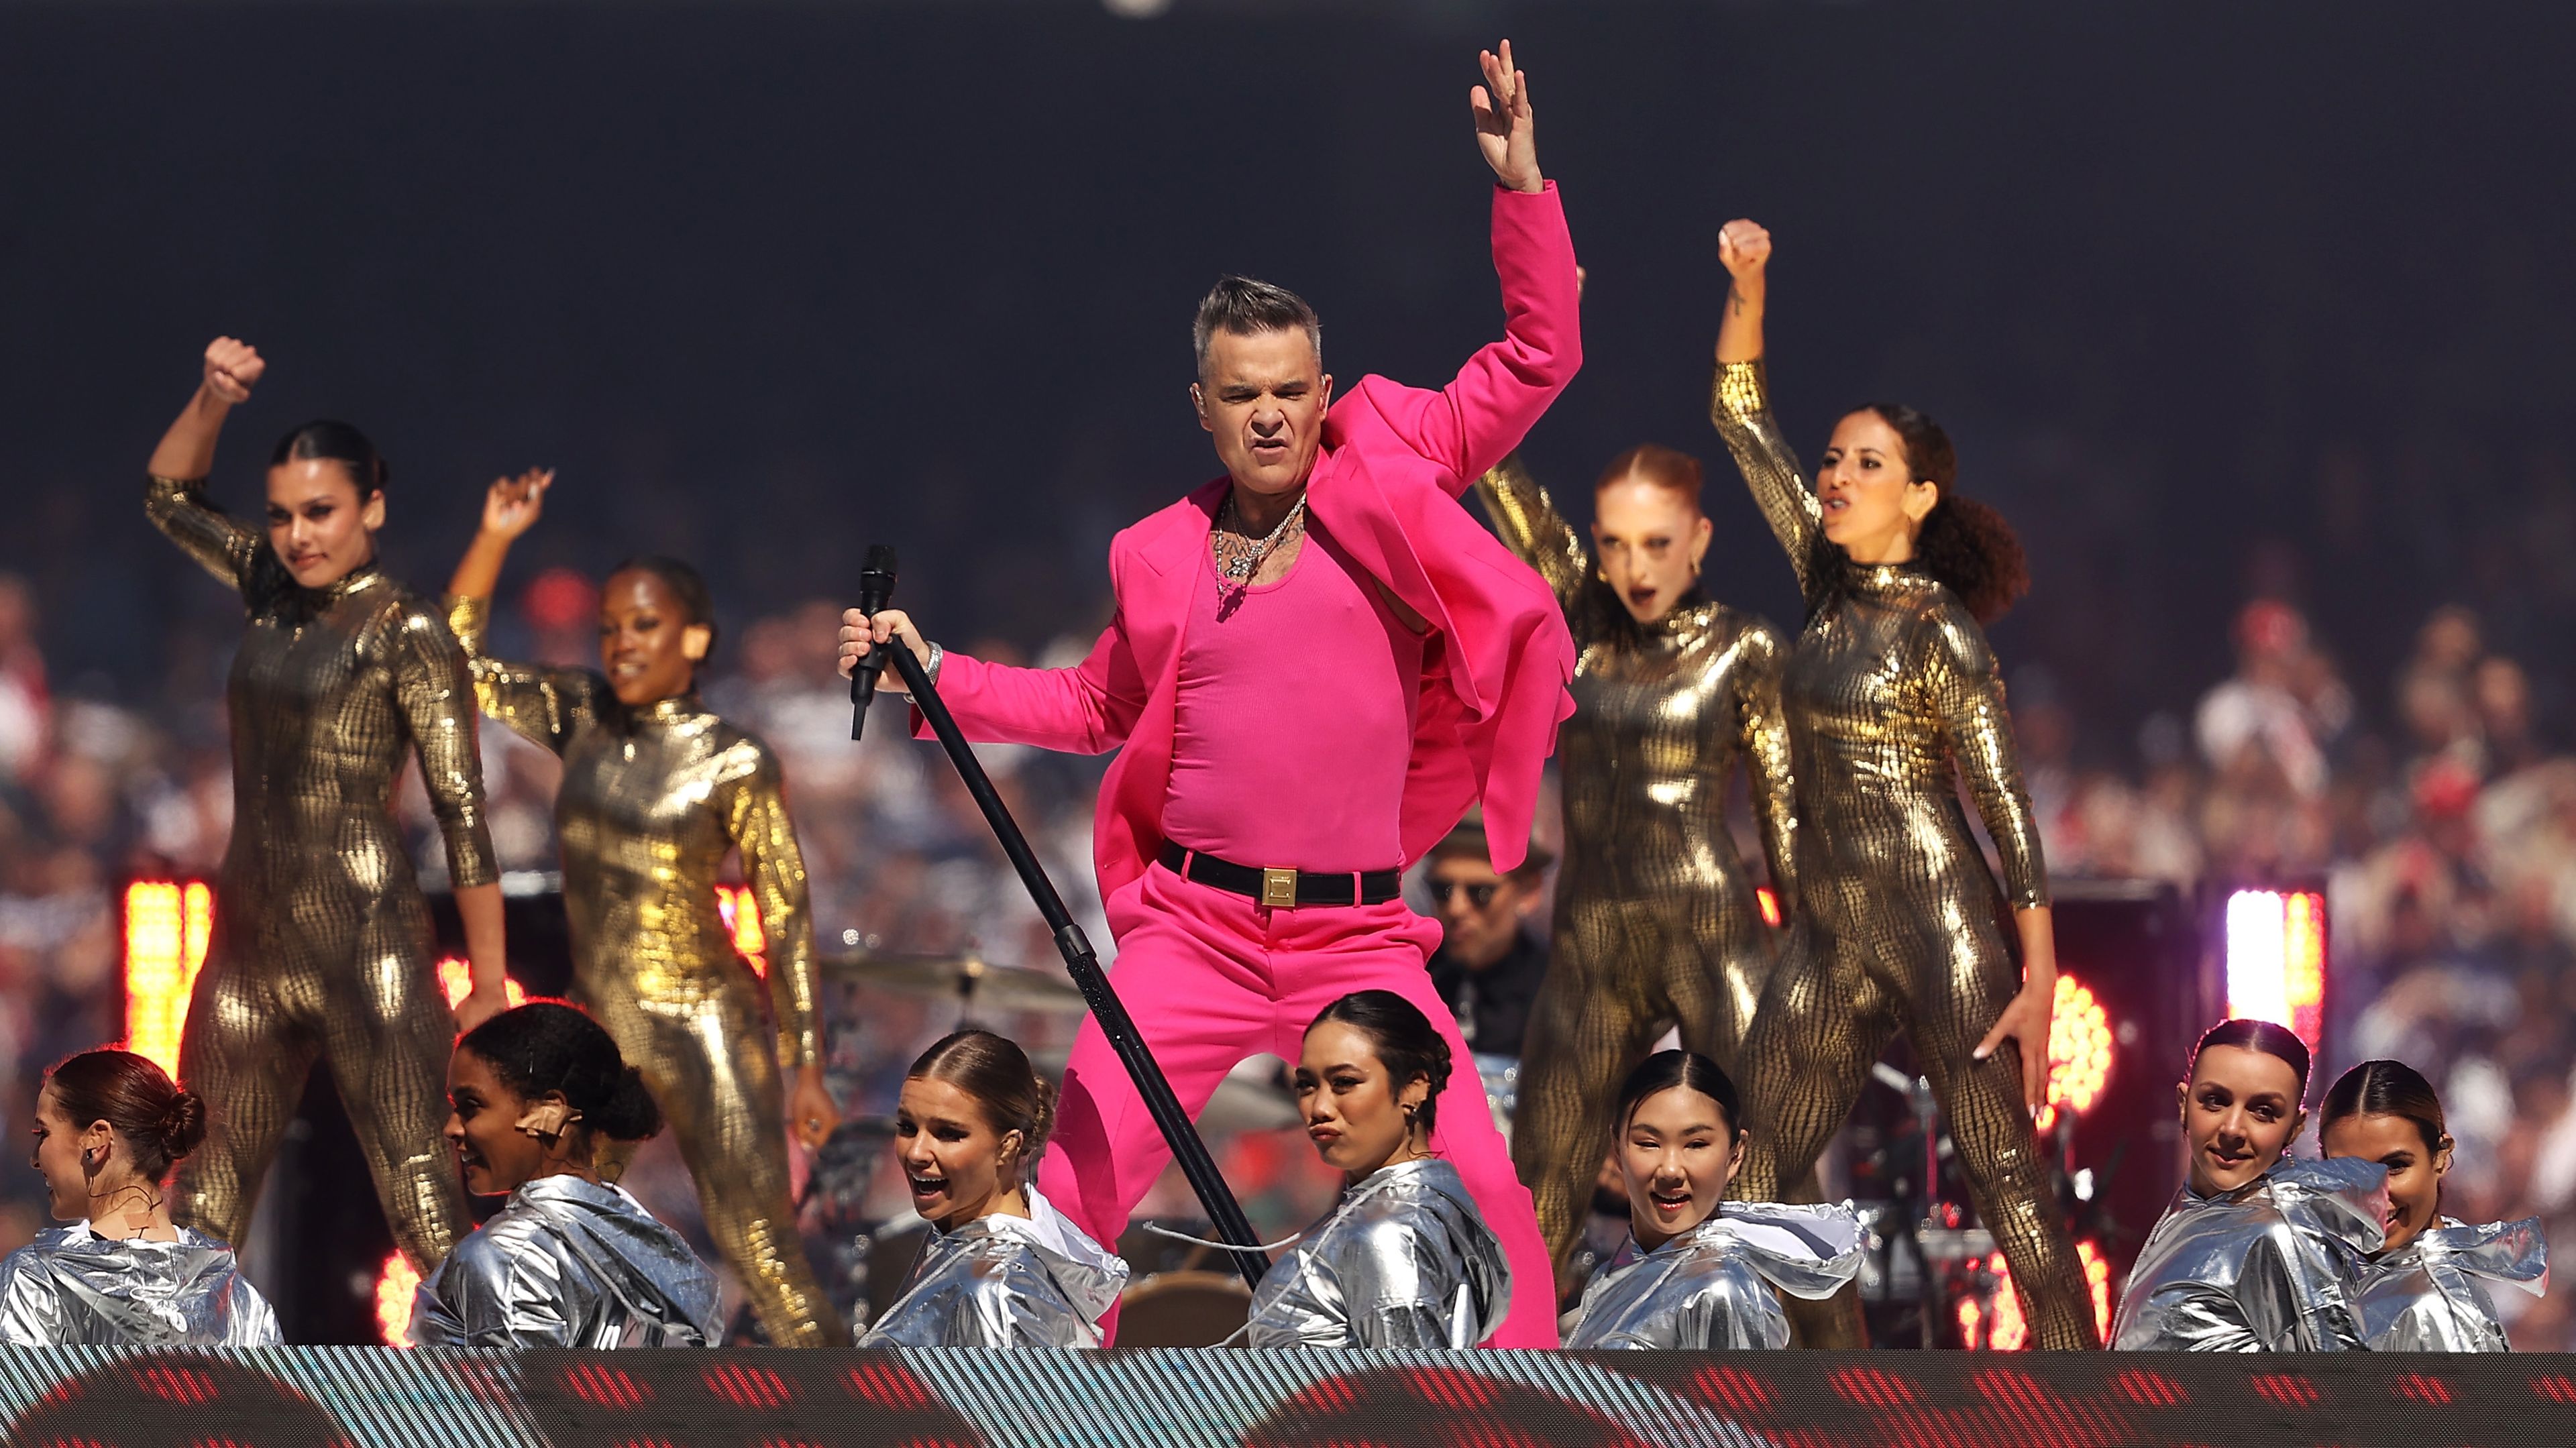 Robbie Williams performs in the pre-game entertainment before the 2022 AFL Grand Final match between the Geelong Cats and the Sydney Swans at the Melbourne Cricket Ground on September 24, 2022 in Melbourne, Australia. (Photo by Mark Kolbe/AFL Photos/via Getty Images)